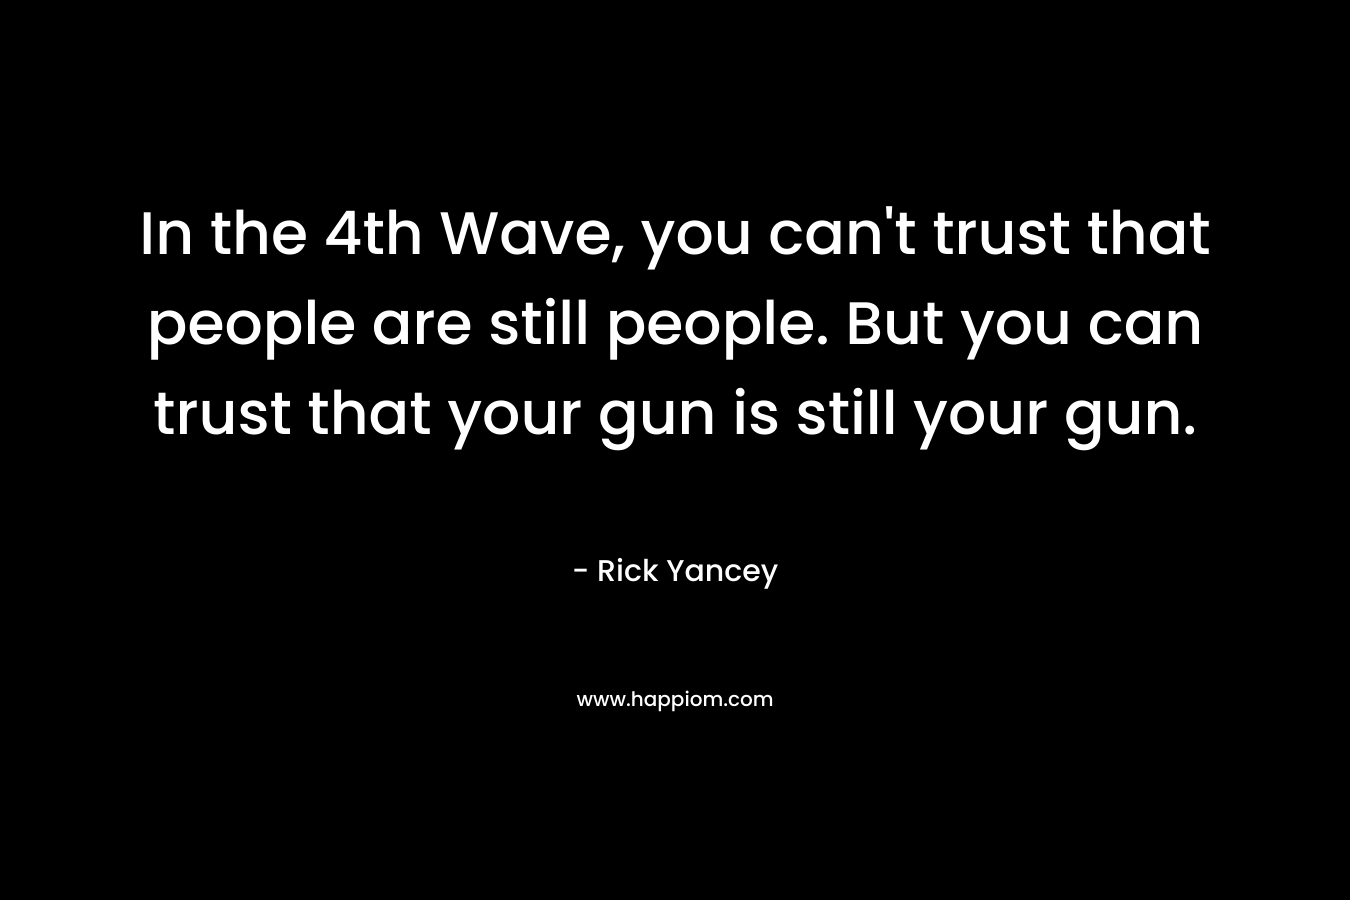 In the 4th Wave, you can't trust that people are still people. But you can trust that your gun is still your gun.